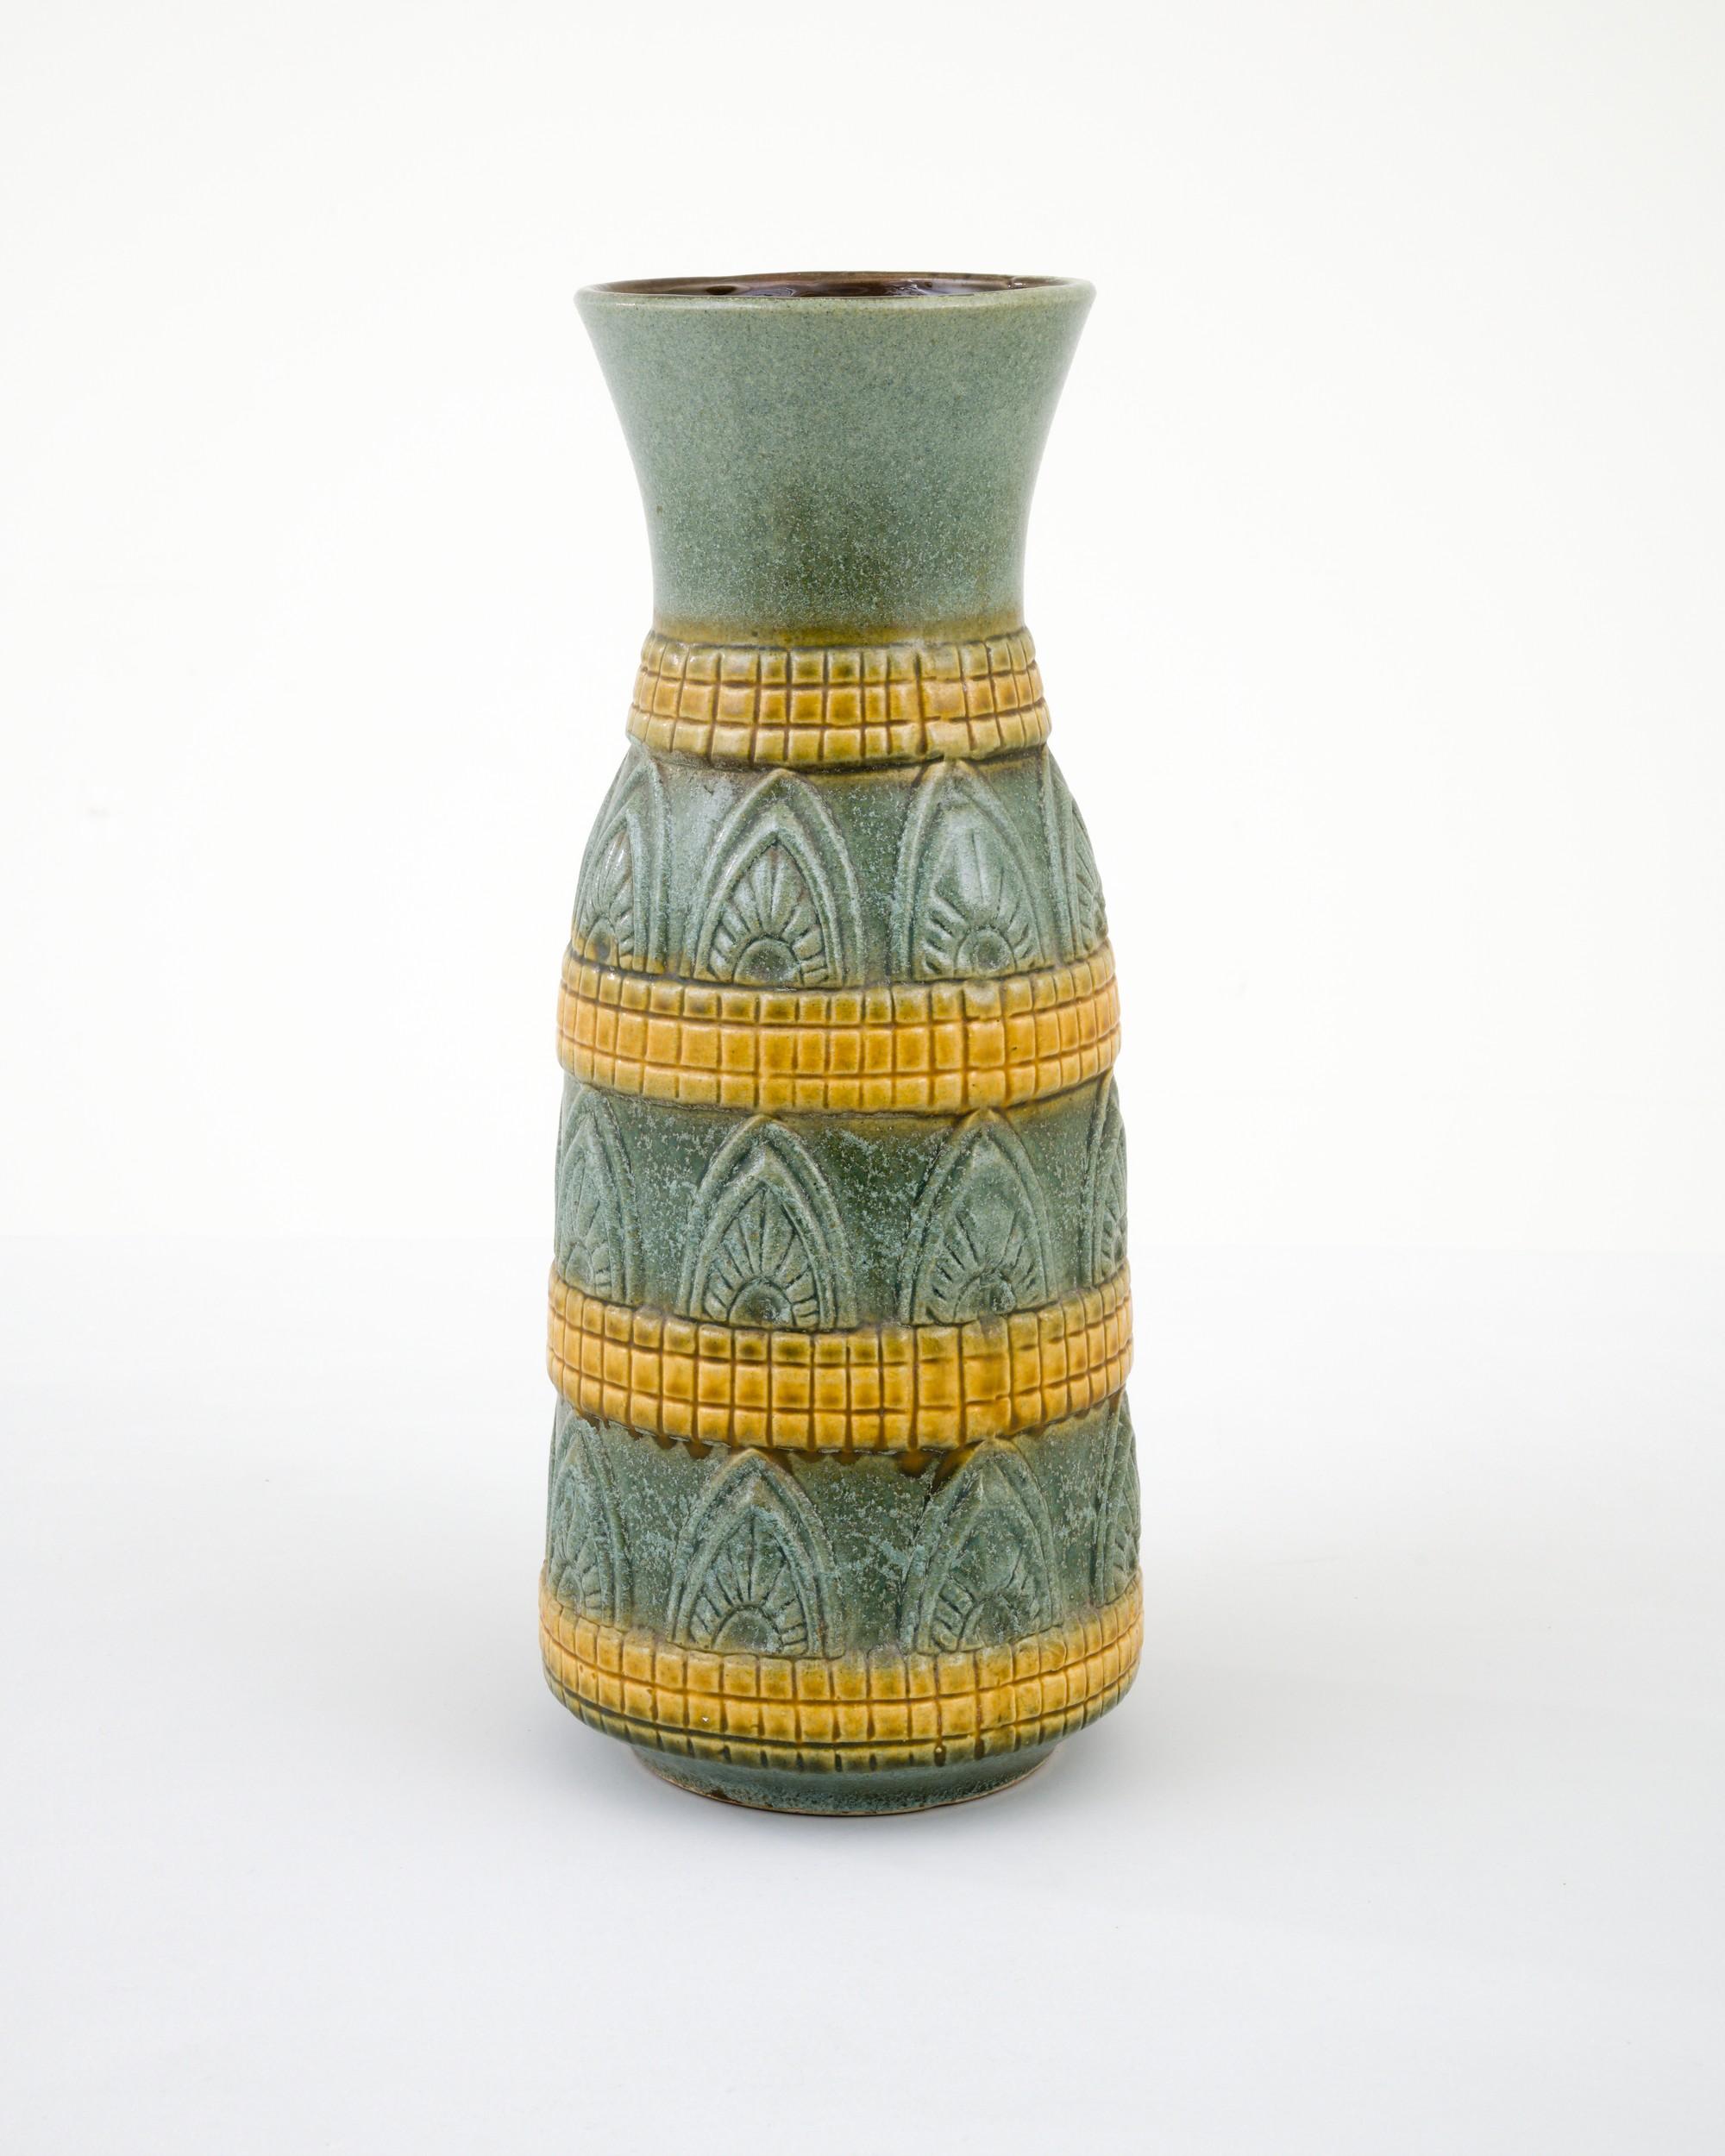 A ceramic vase from mid-20th century Germany. Neither large nor small, this studio made pot reflects the hand-held, and the handmade; the tactility of process and the artist's vision– realized on the potter’s wheel. Attractive olive green and yellow